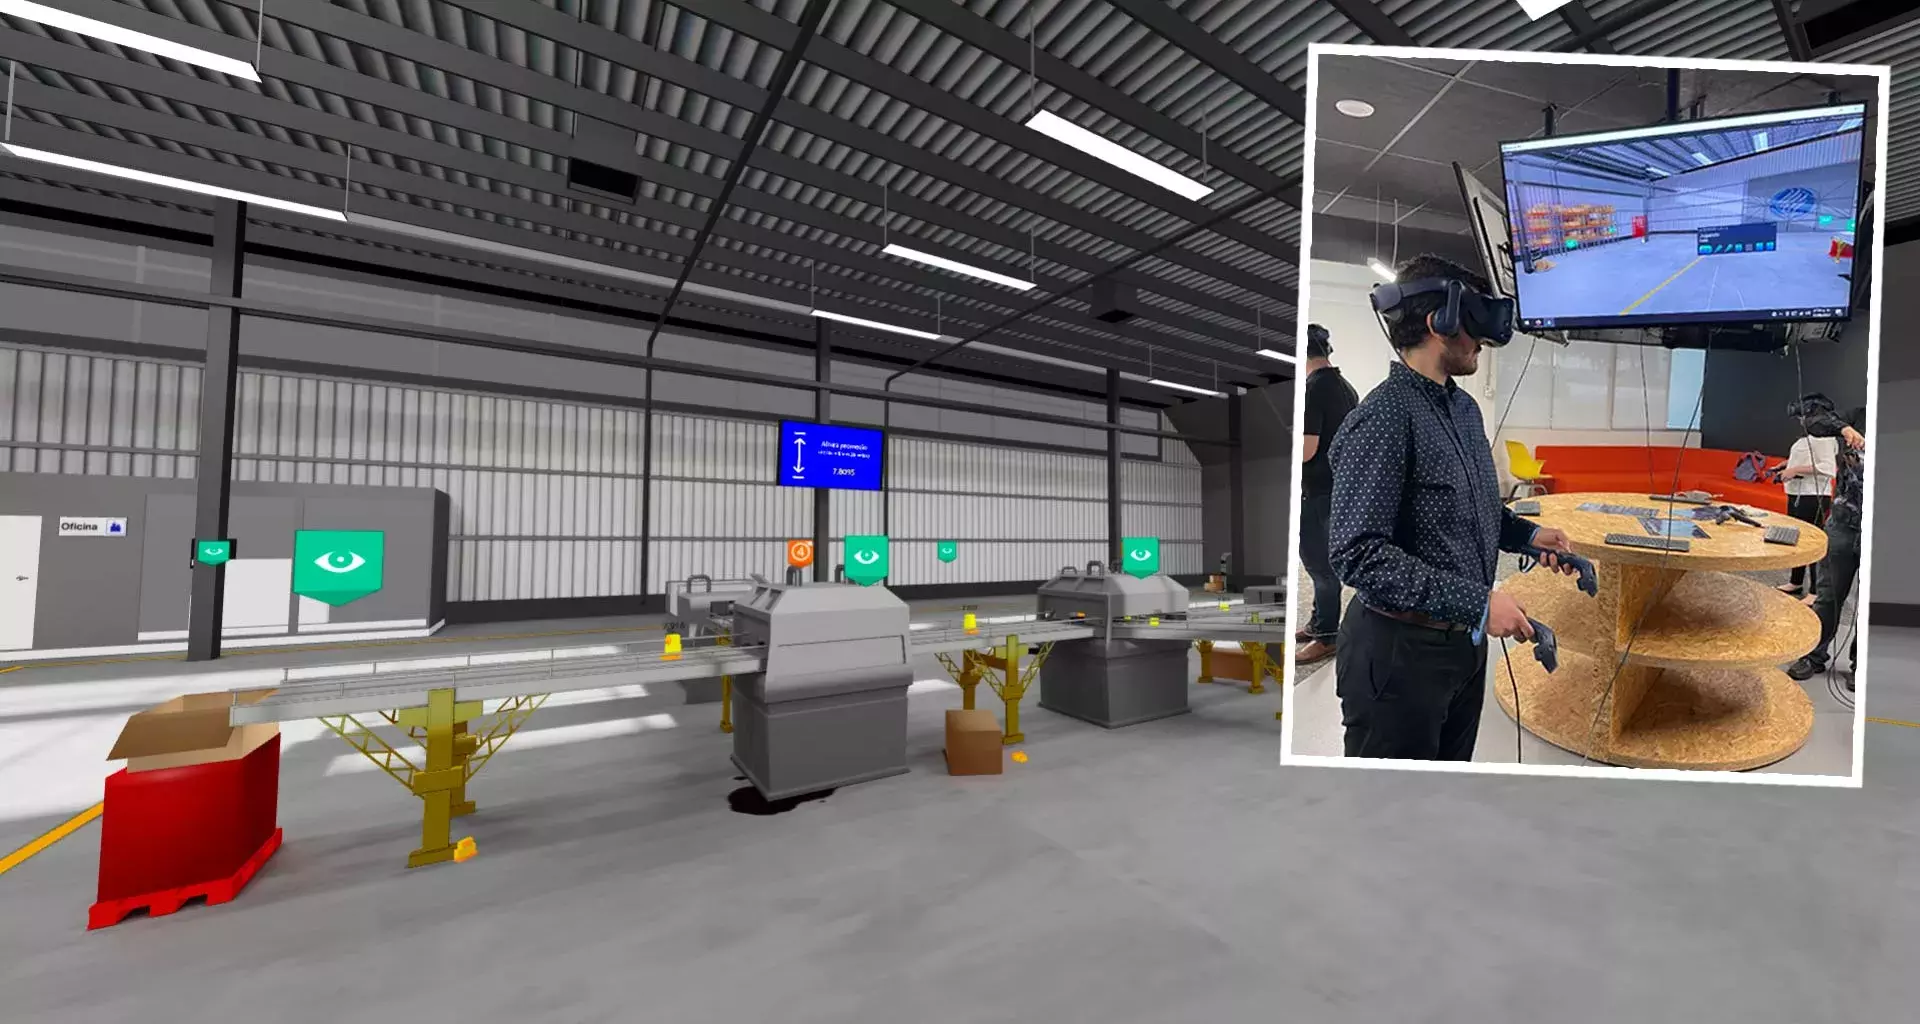 Tec professors create virtual factory as a way to learn